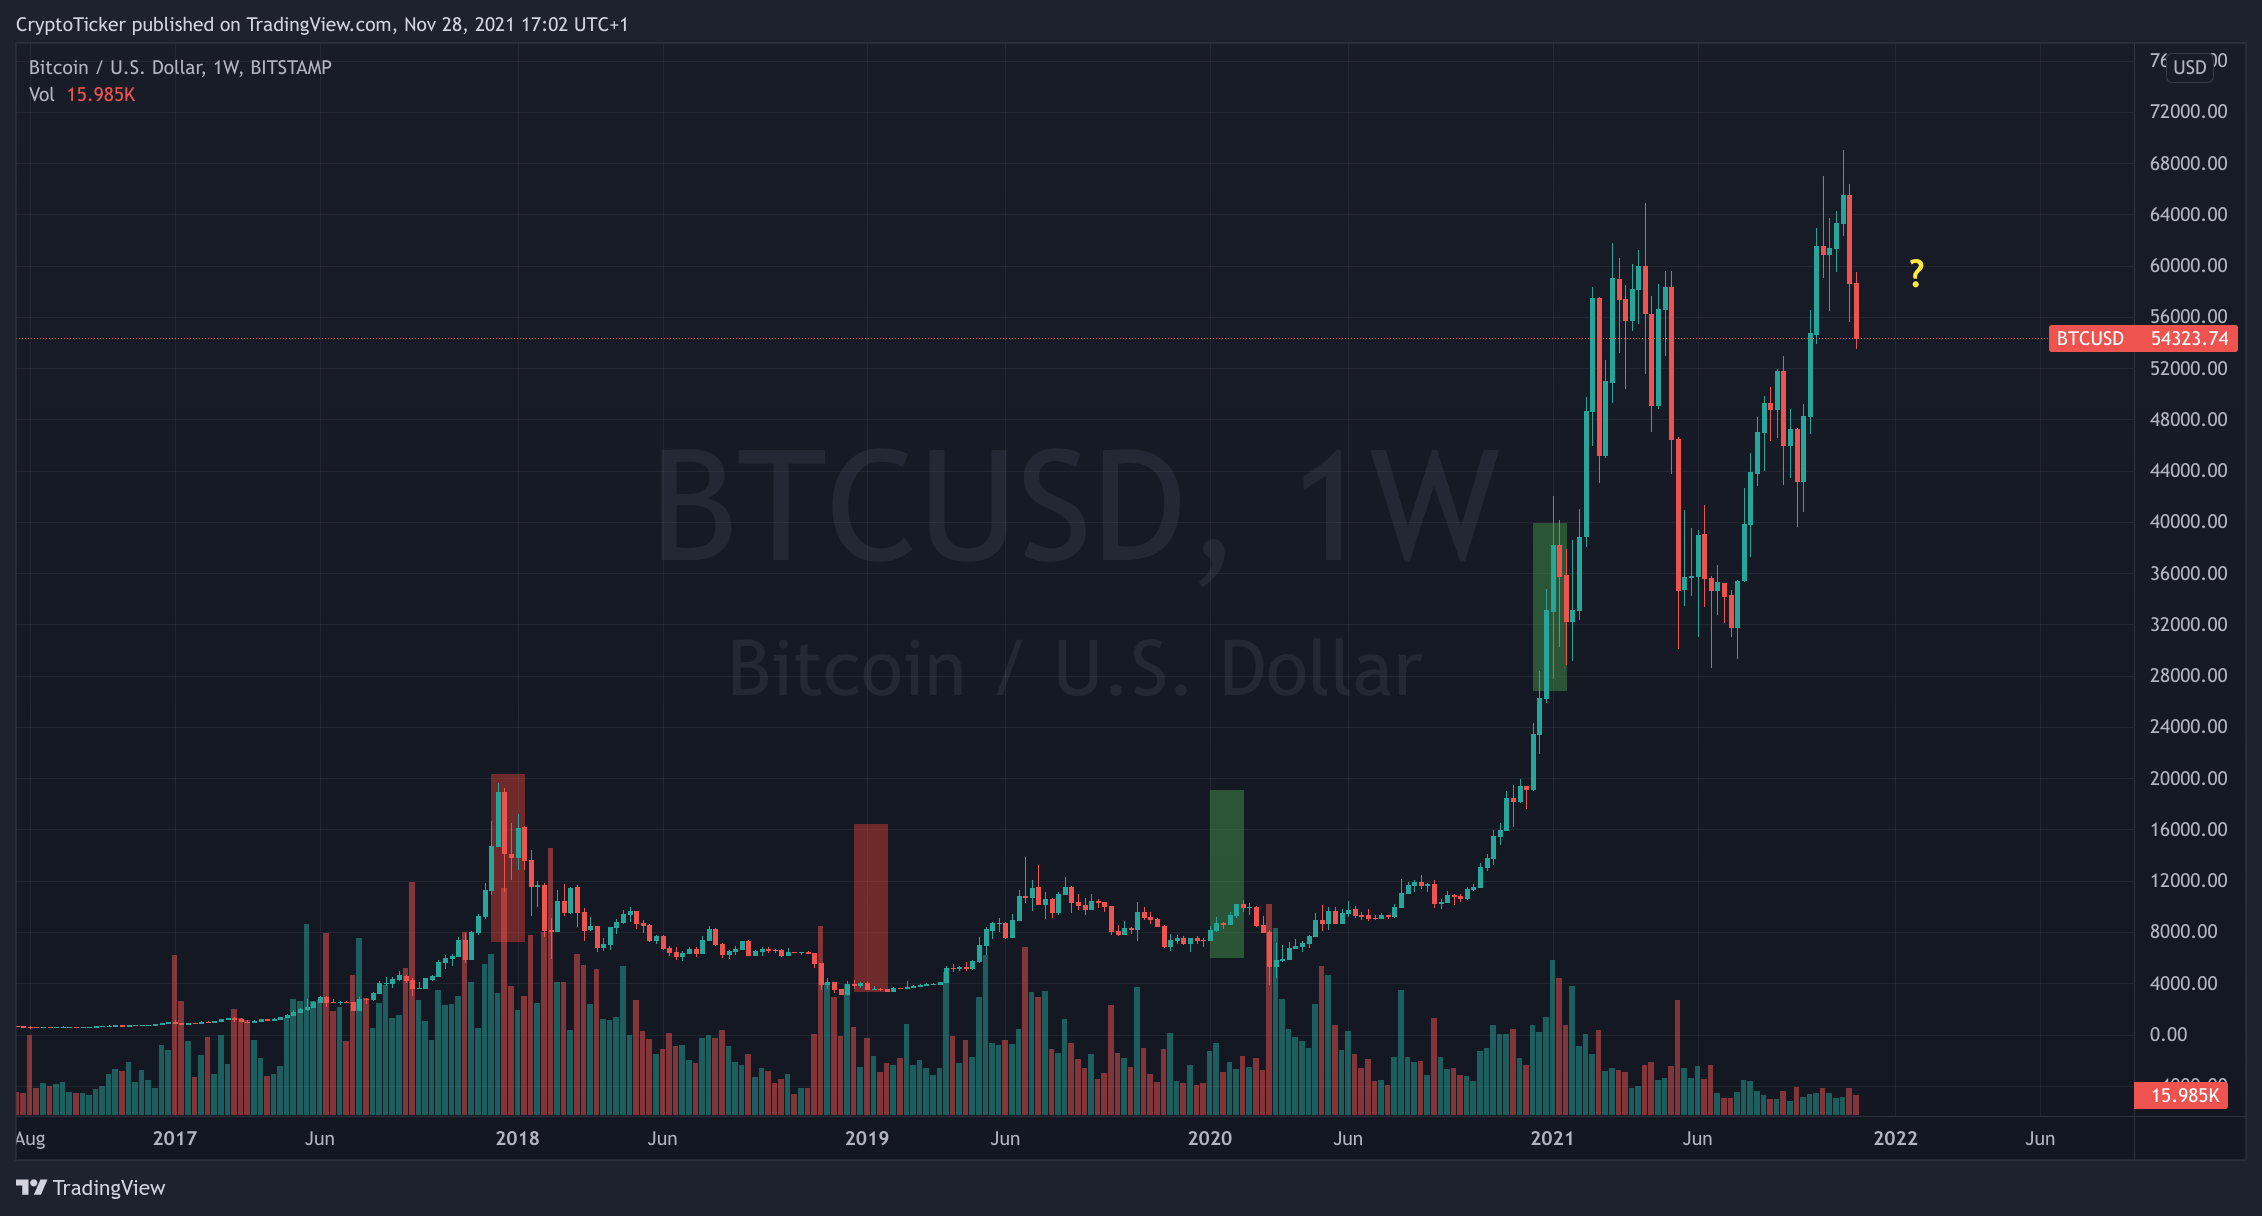 BTC/USD 1-week chart showing BTC's price-action in each December